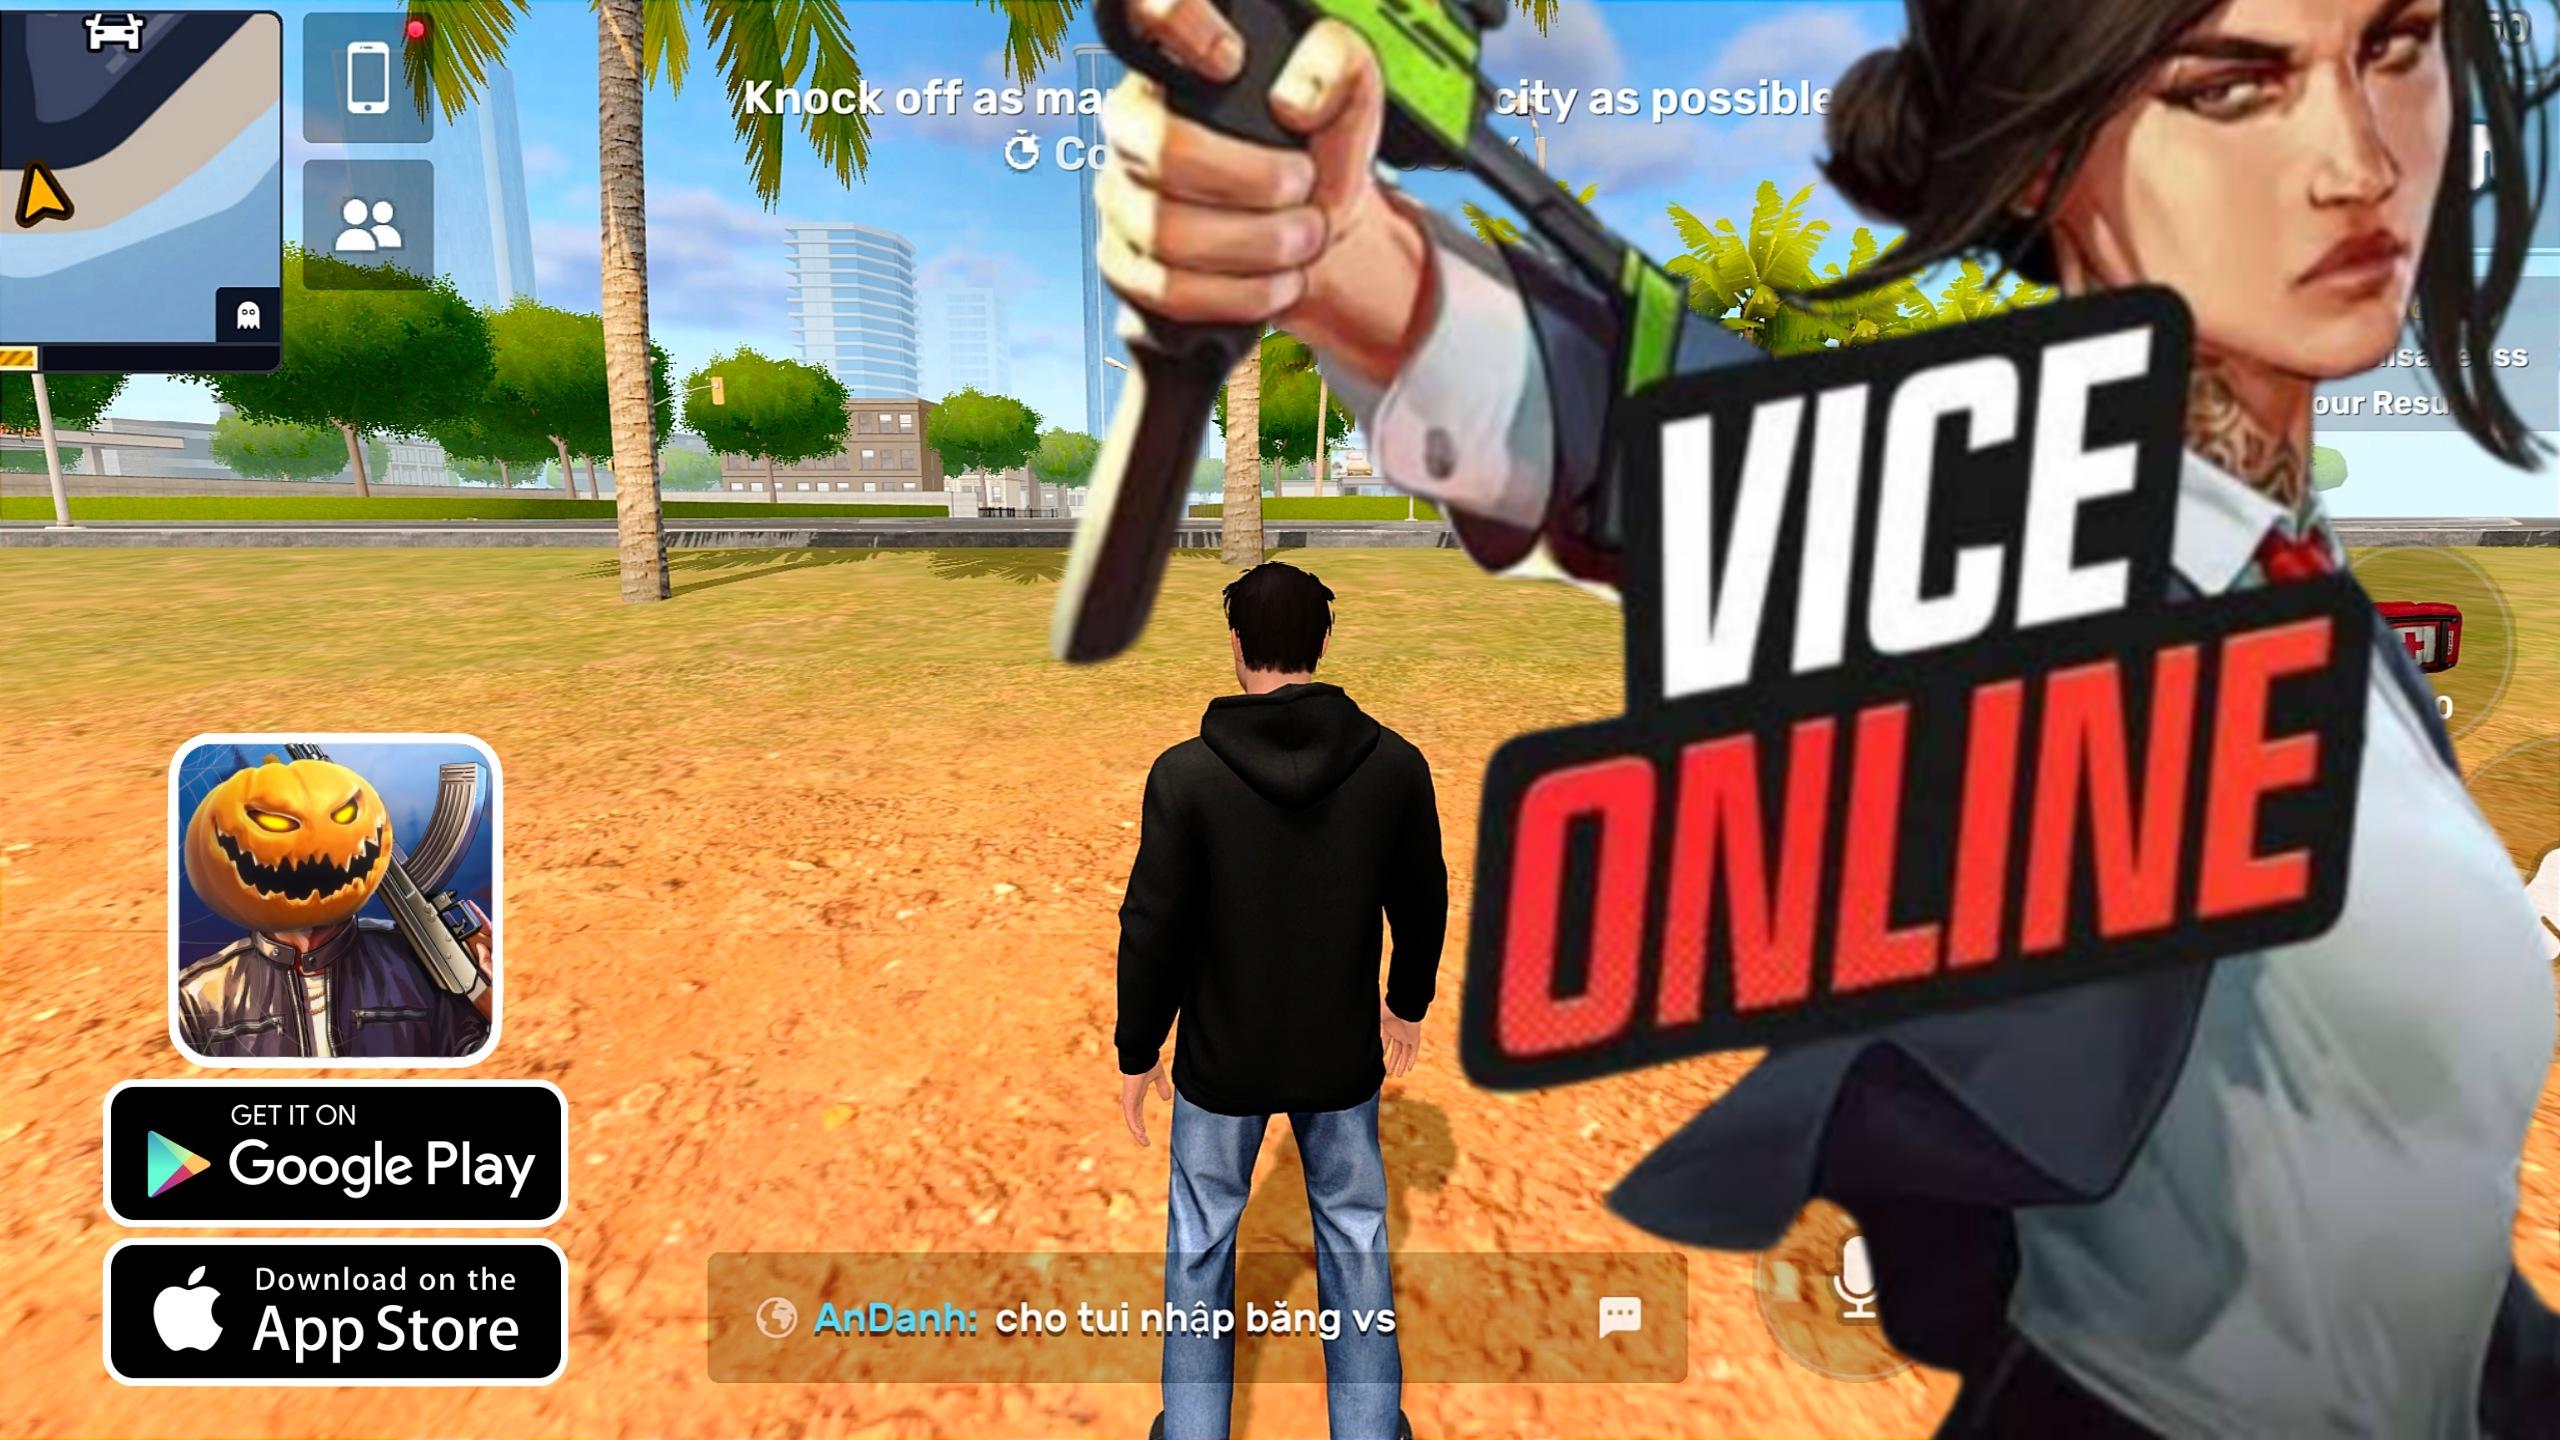 Vice Online - Open World Games - Apps on Google Play